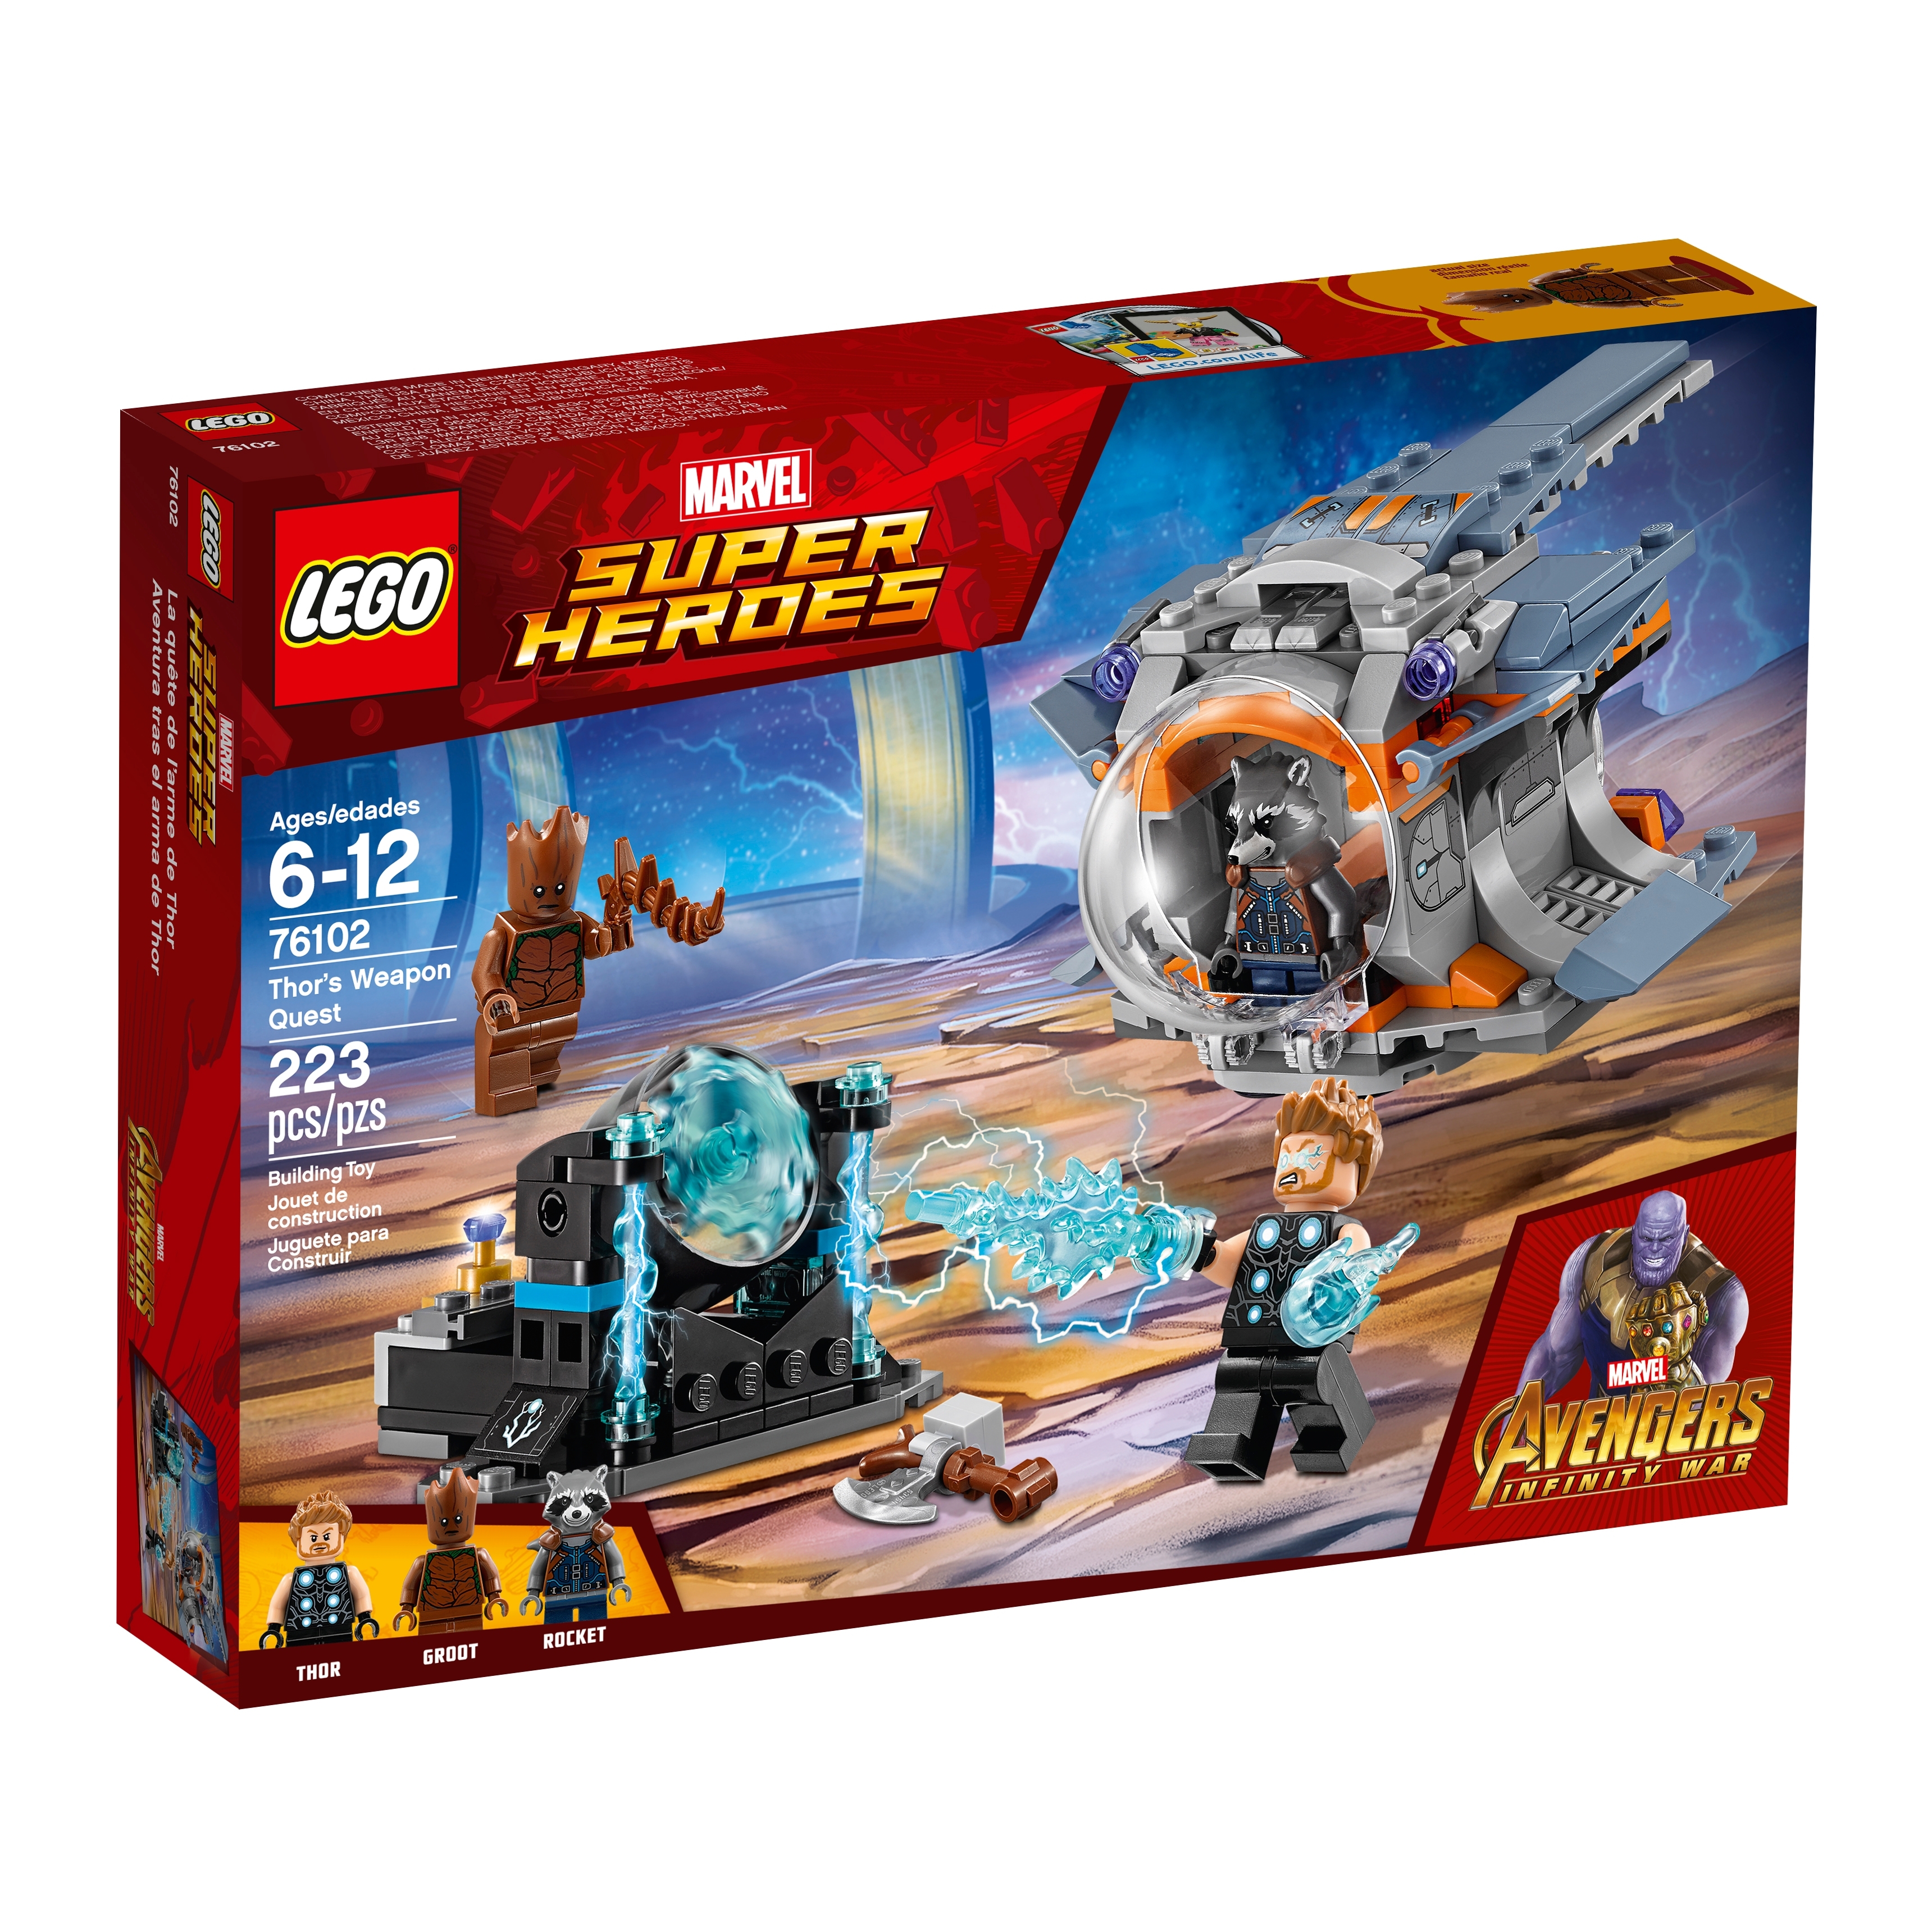 Lego Minifigures & Power Stone from Thor's Weapon Quest 76102 with accessories 